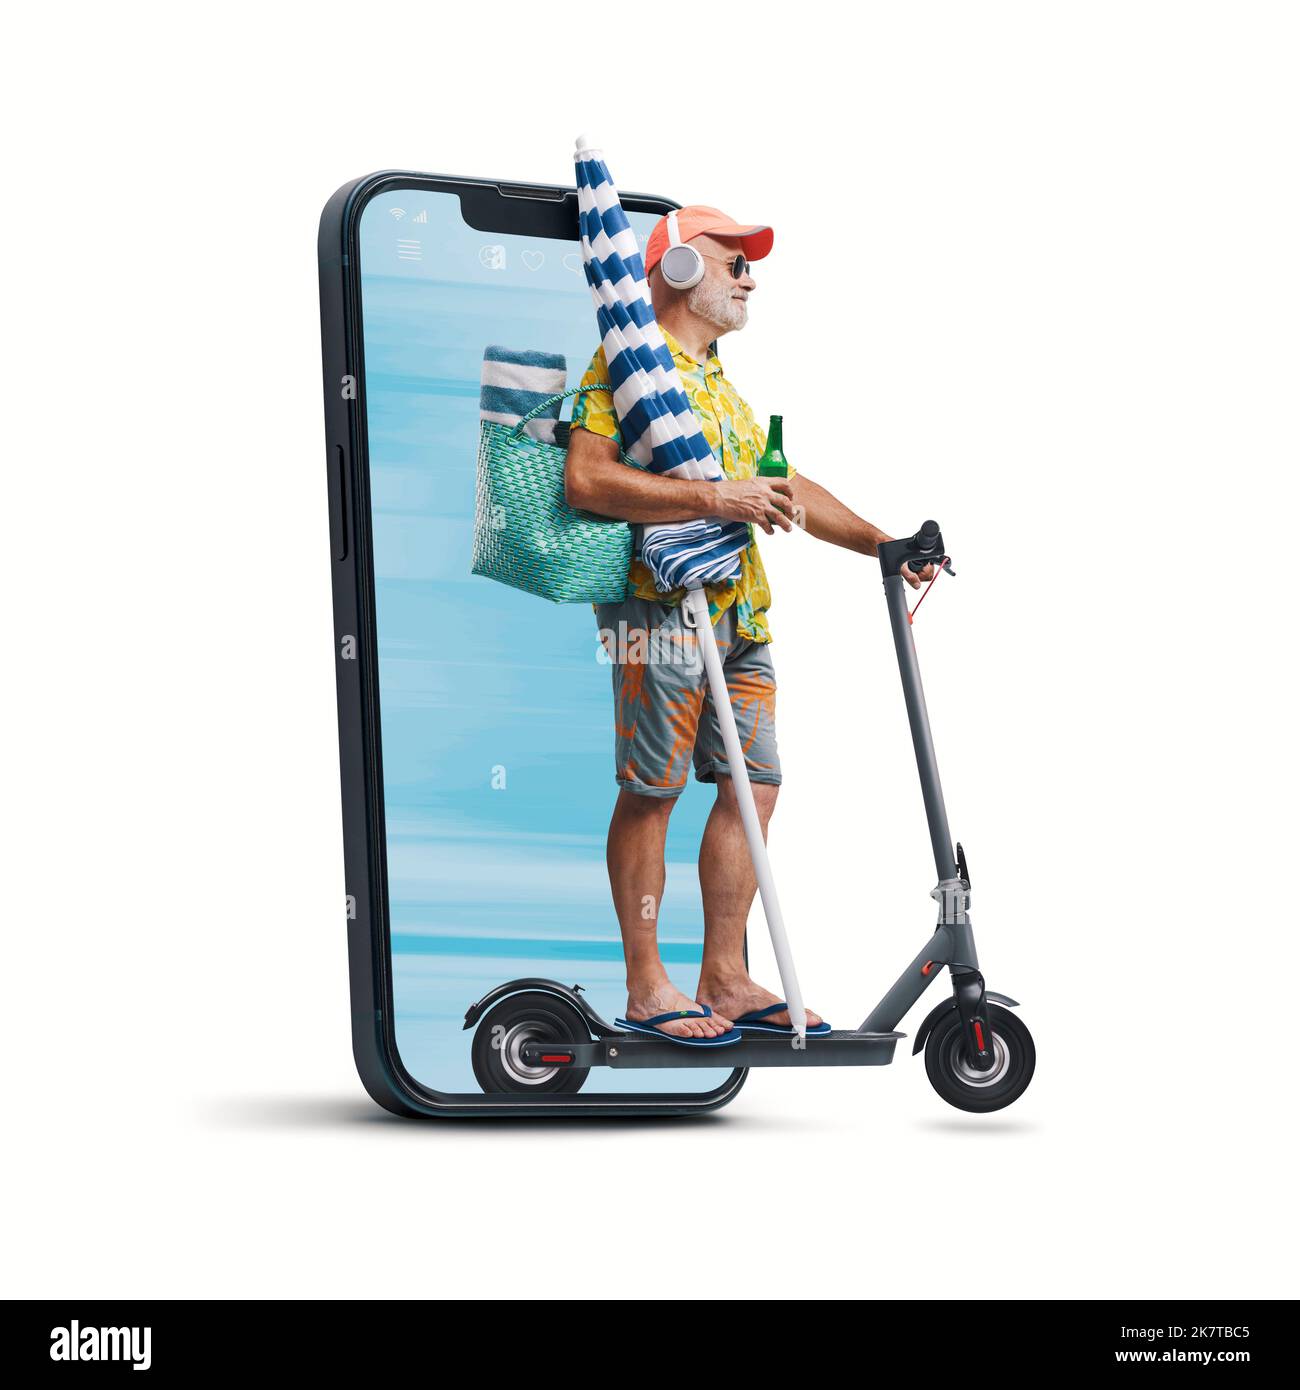 Funny senior tourist riding an electric scooter and going to the beach, he is coming out from a smartphone screen, isolated on white background Stock Photo